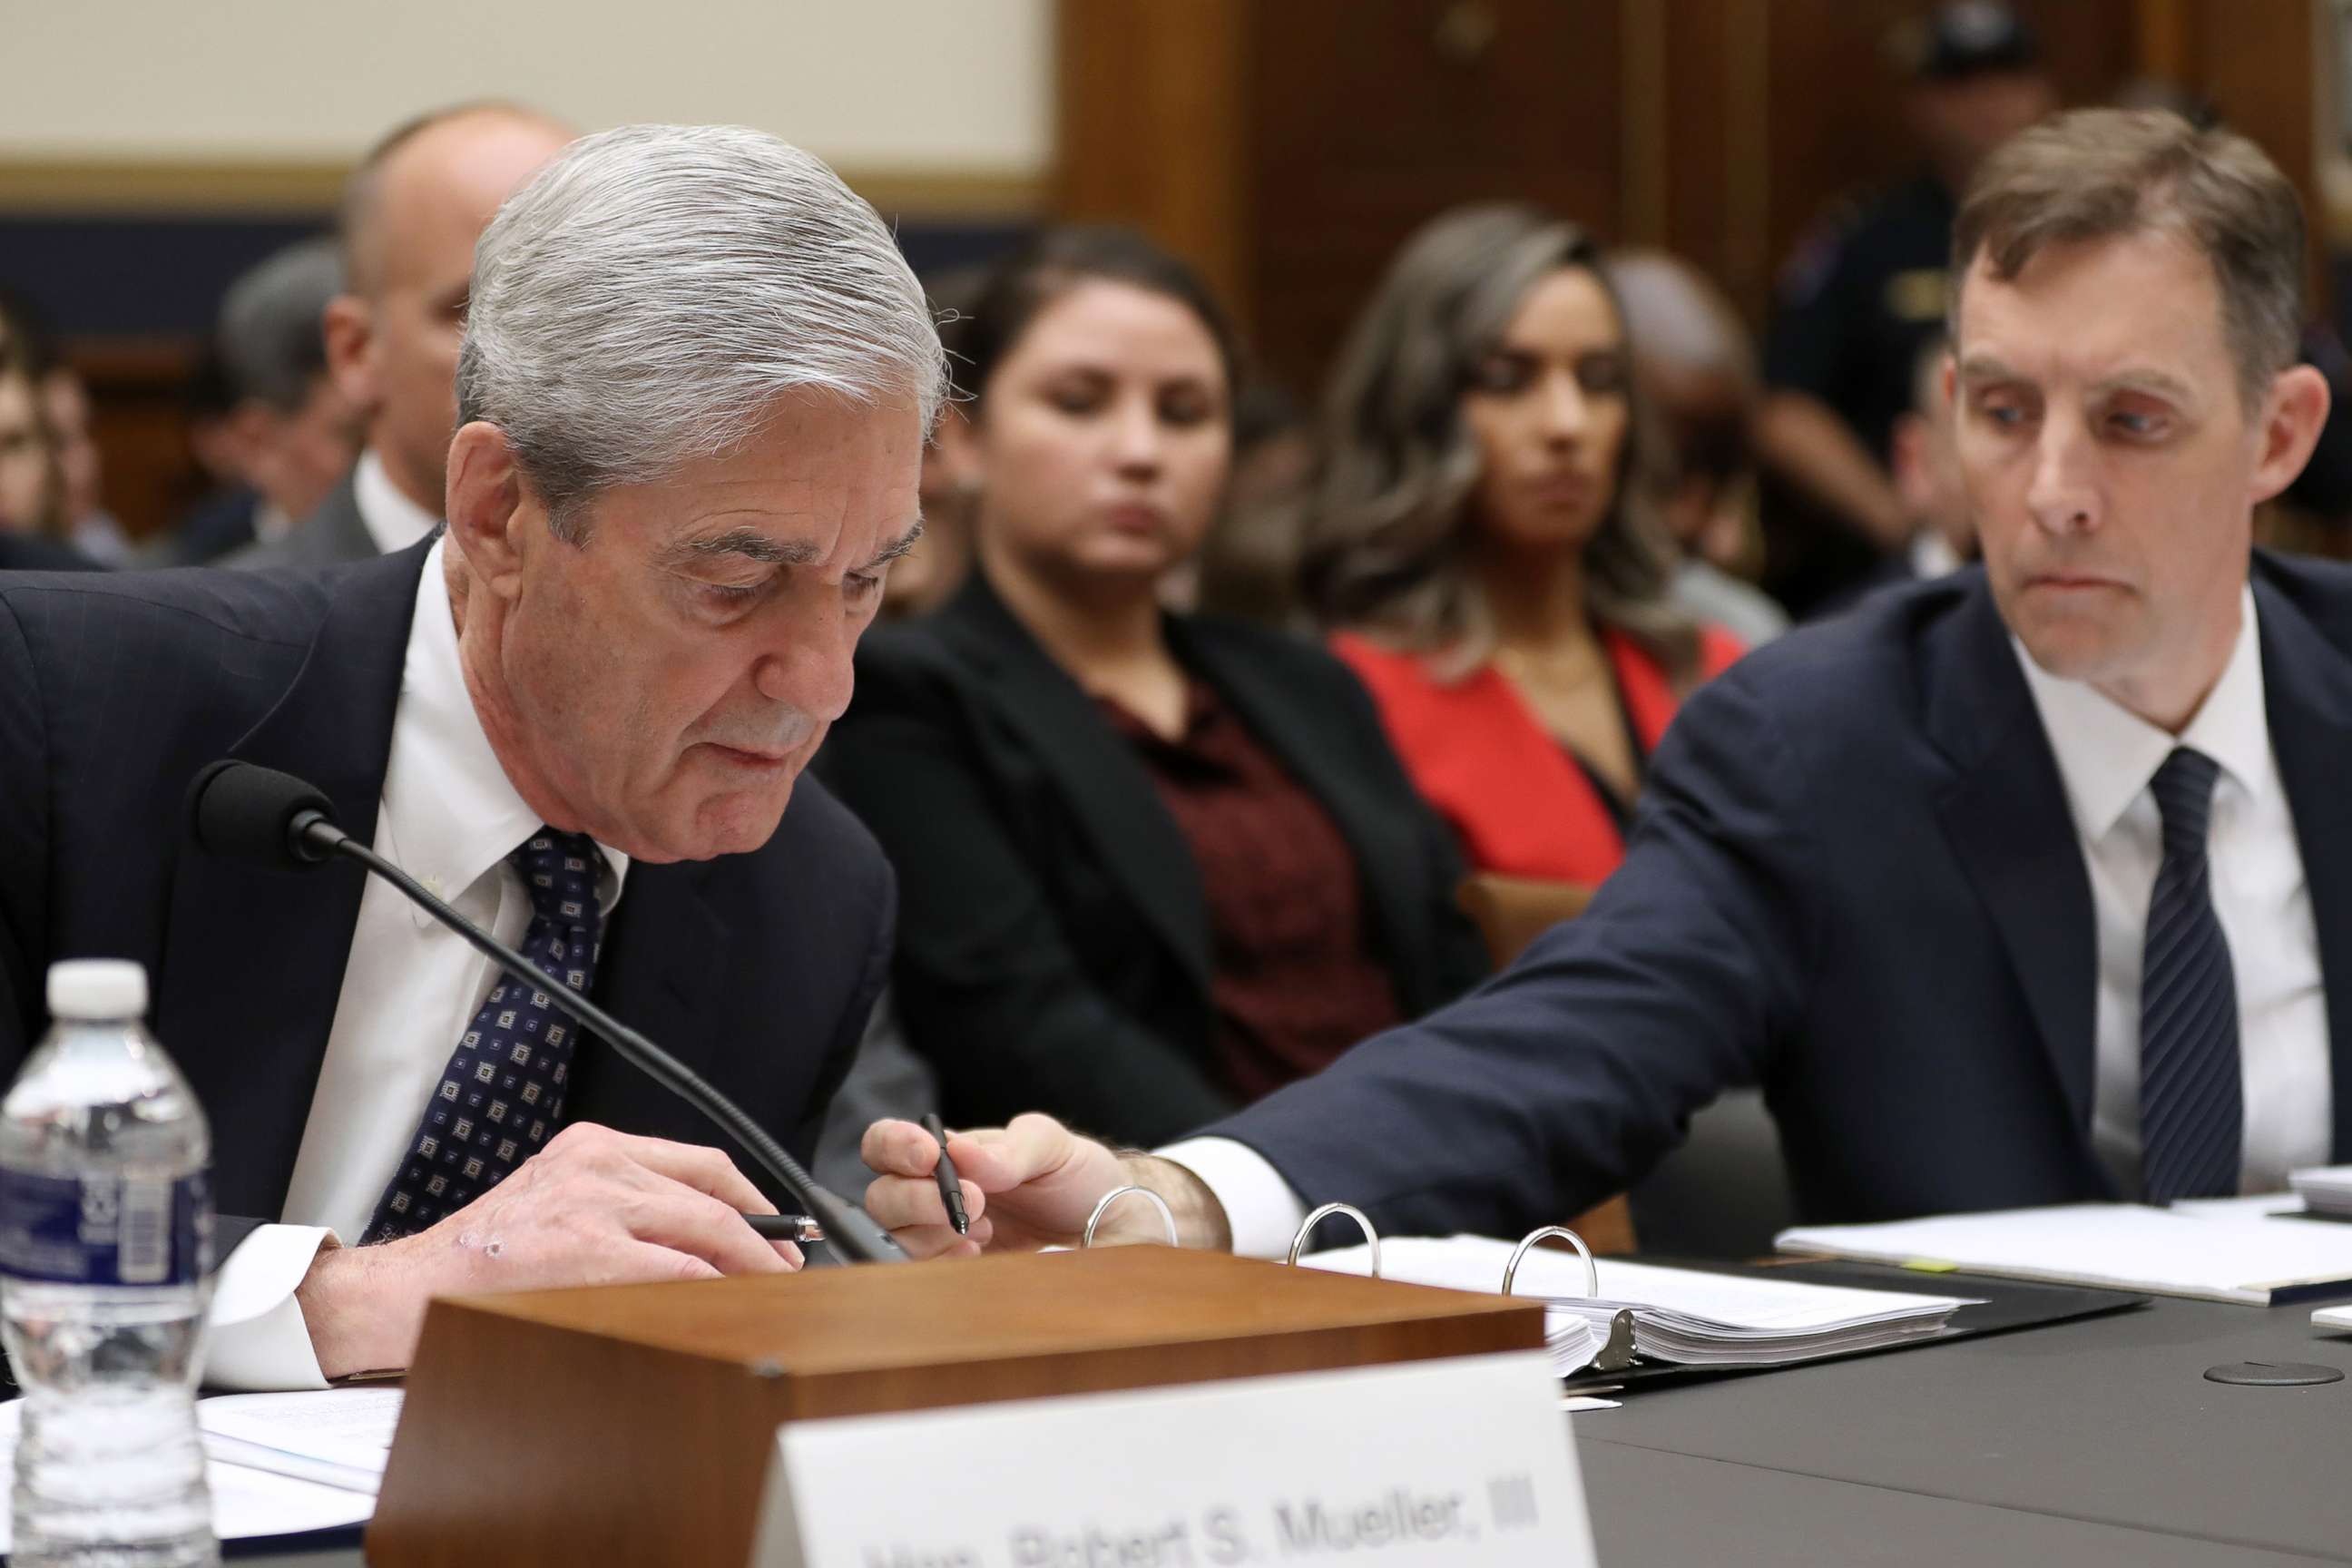 PHOTO: Former Special Counsel Robert Mueller and former Deputy Special Counsel Aaron Zebley, right, go over notes as Mueller testifies before the House Judiciary Committee about his report, July 24, 2019 in Washington, D.C.